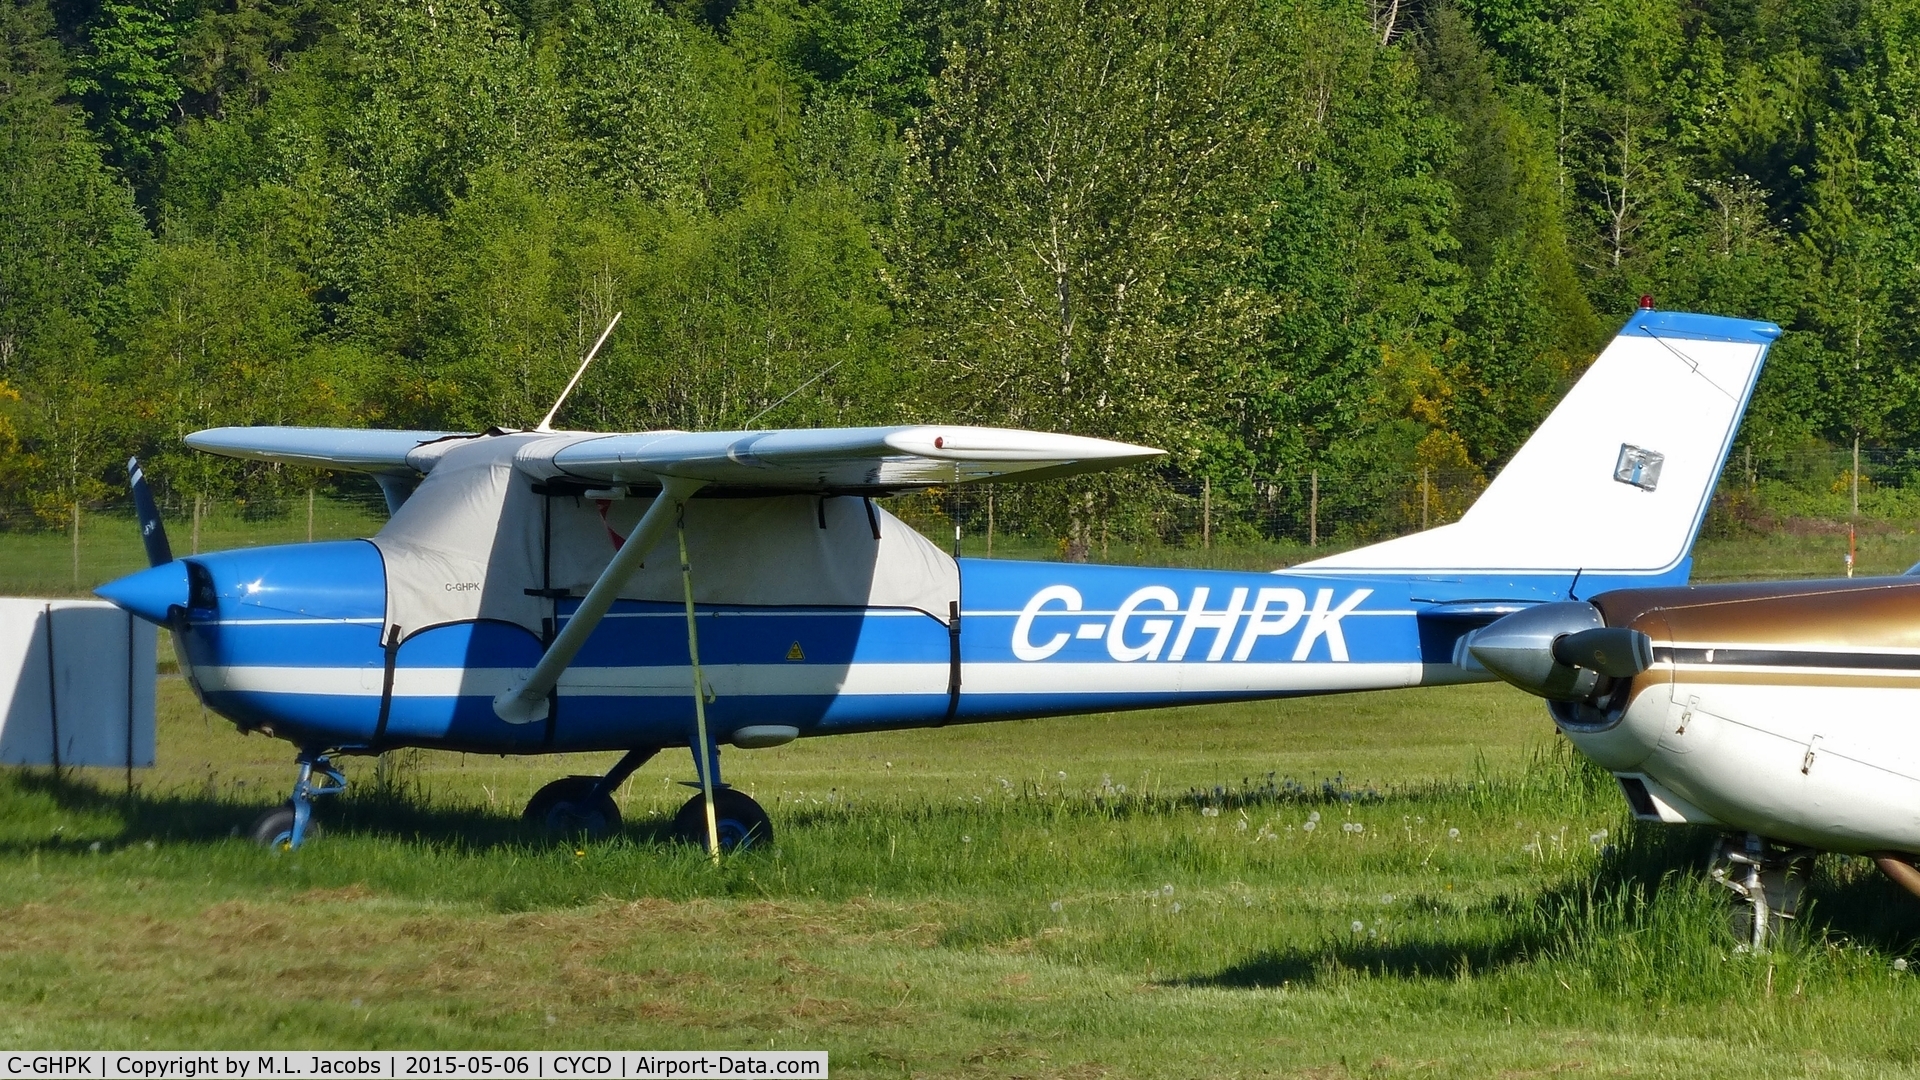 C-GHPK, 1967 Cessna 150H C/N 15067326, Parked in the grass field at Nanaimo airport.